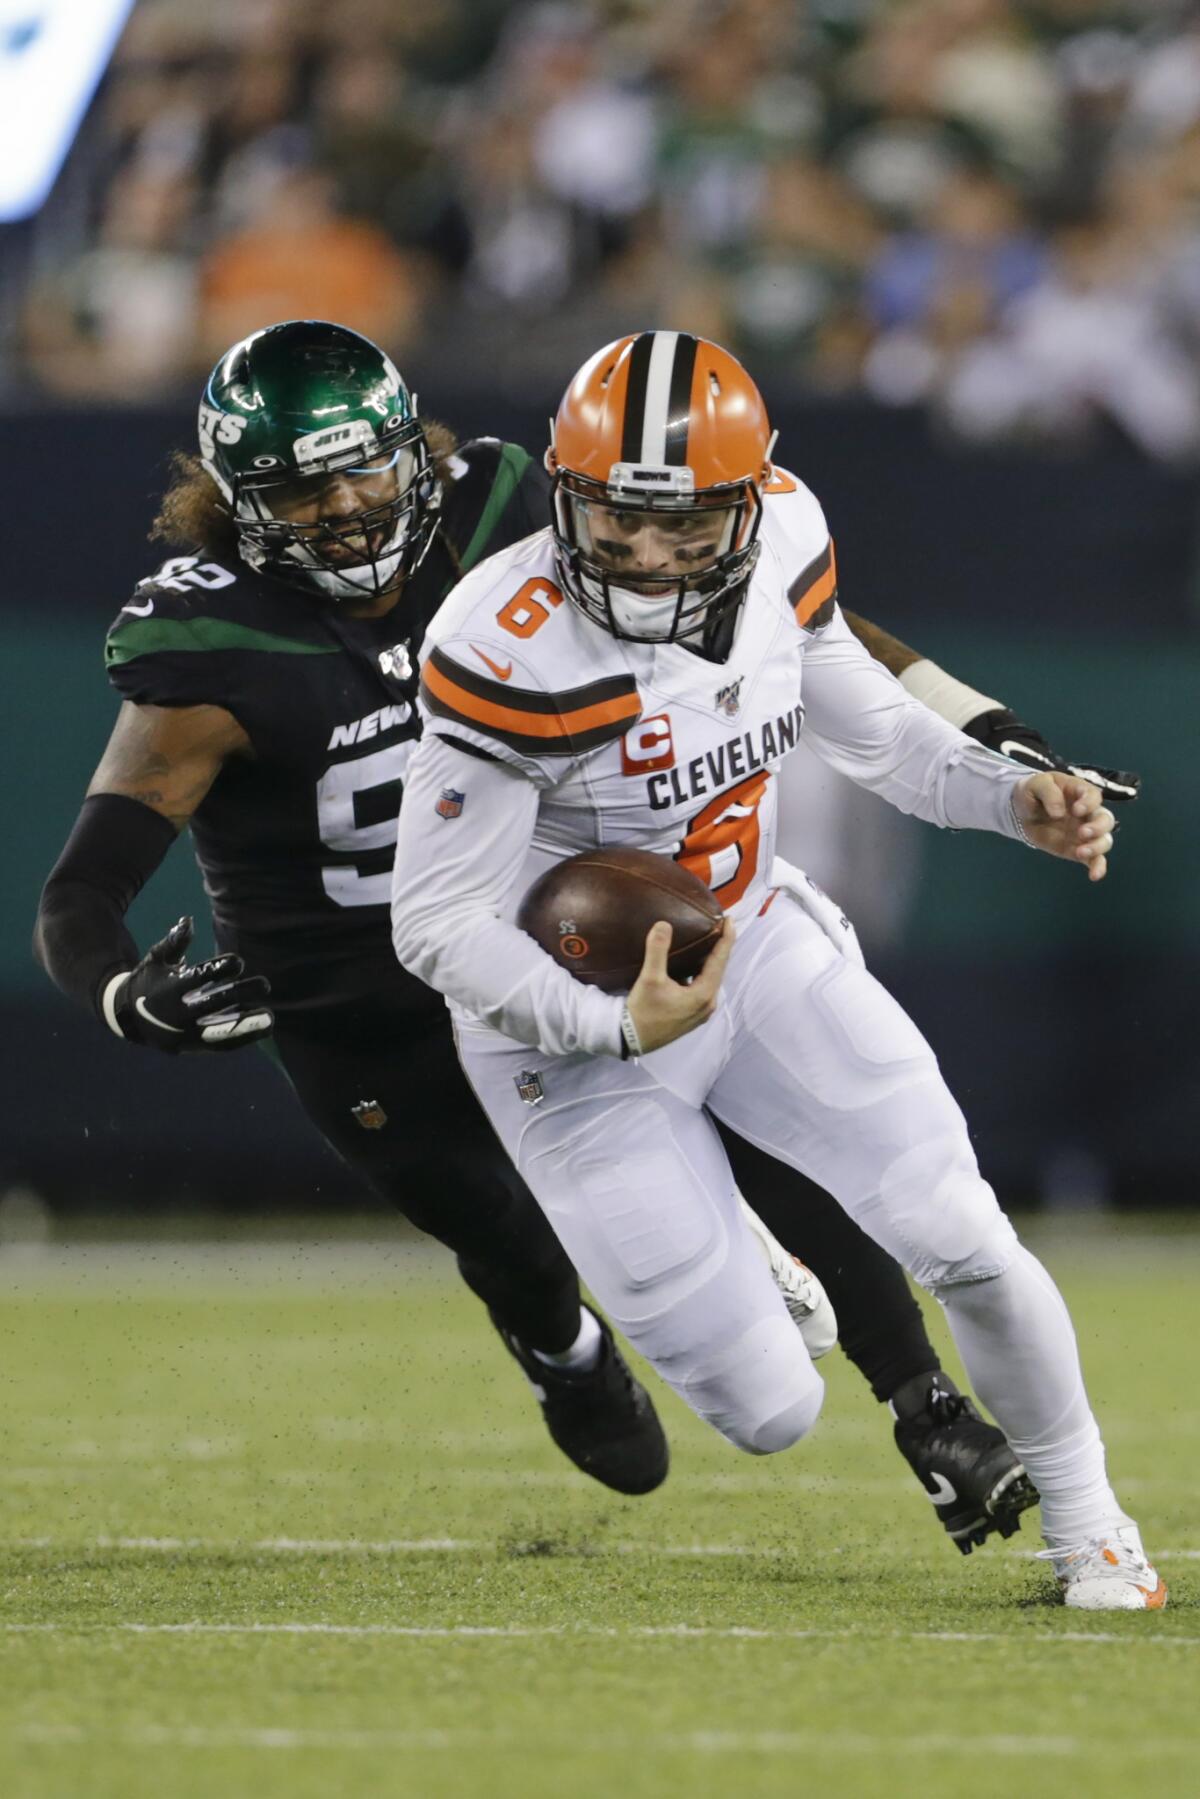 Beckham puts on show in MetLife return, Browns top Jets 23-3 - The